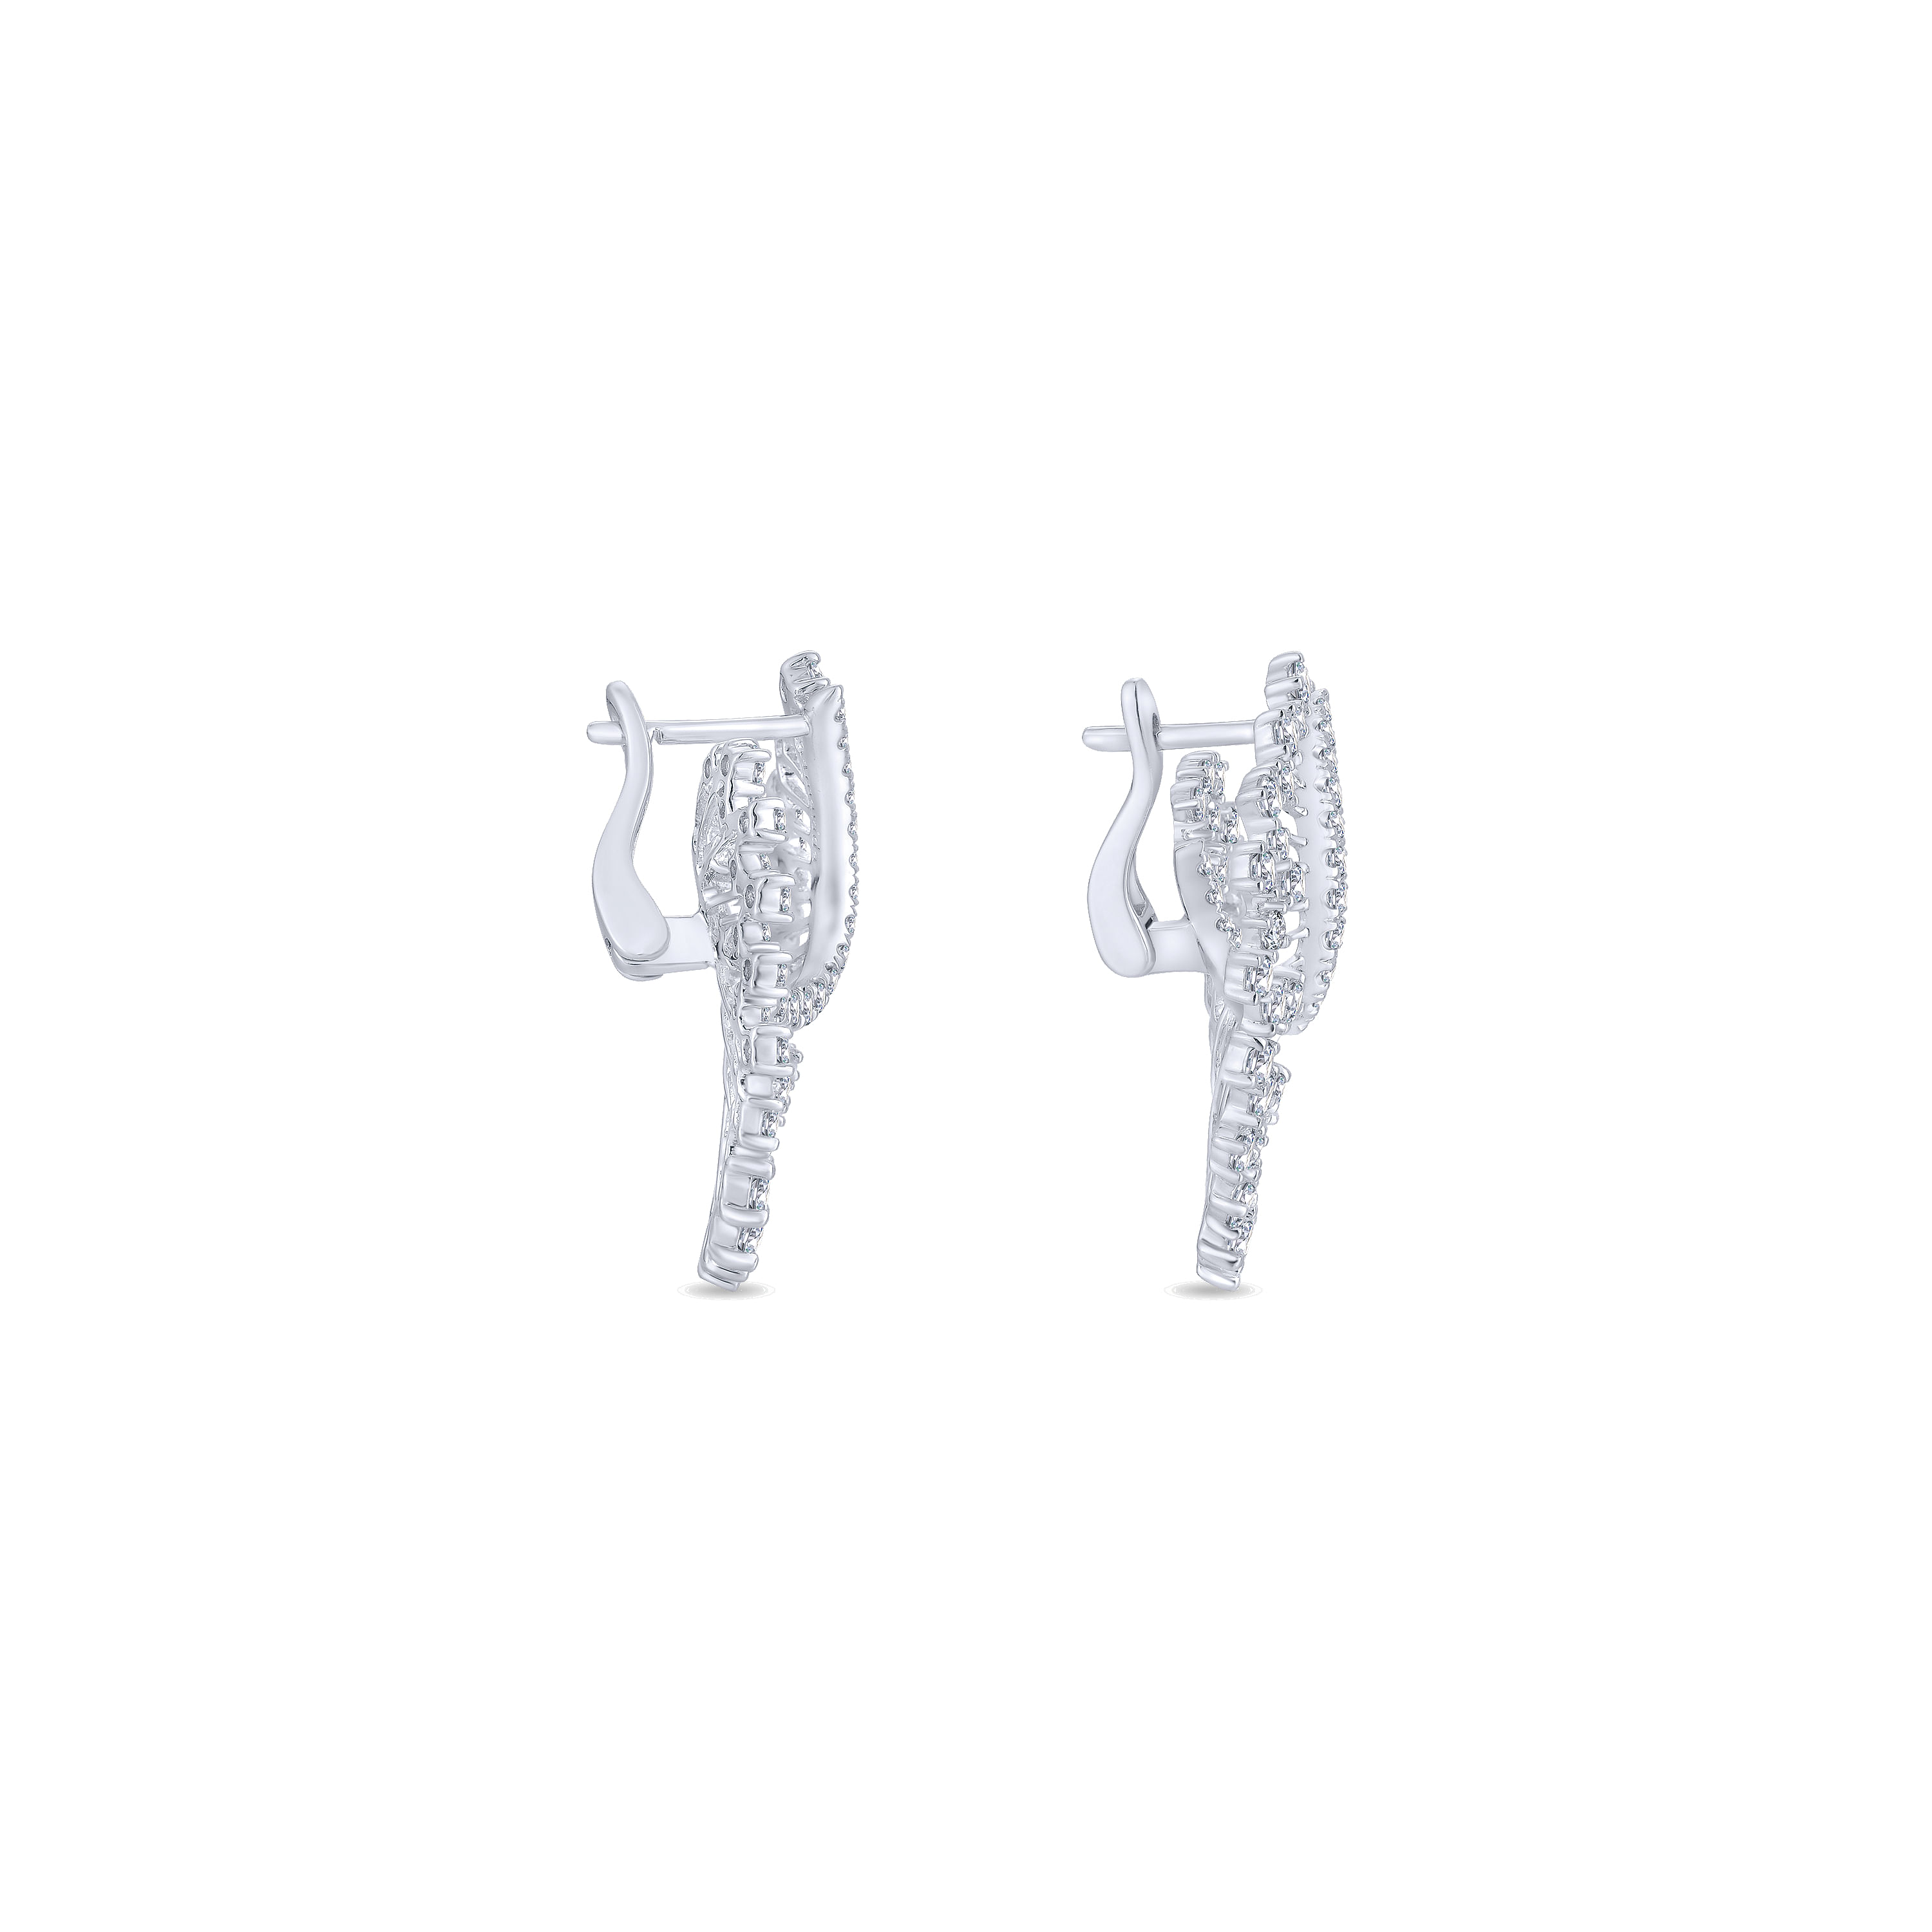 18K White Gold Abstract Openwork Diamond Statement Earrings